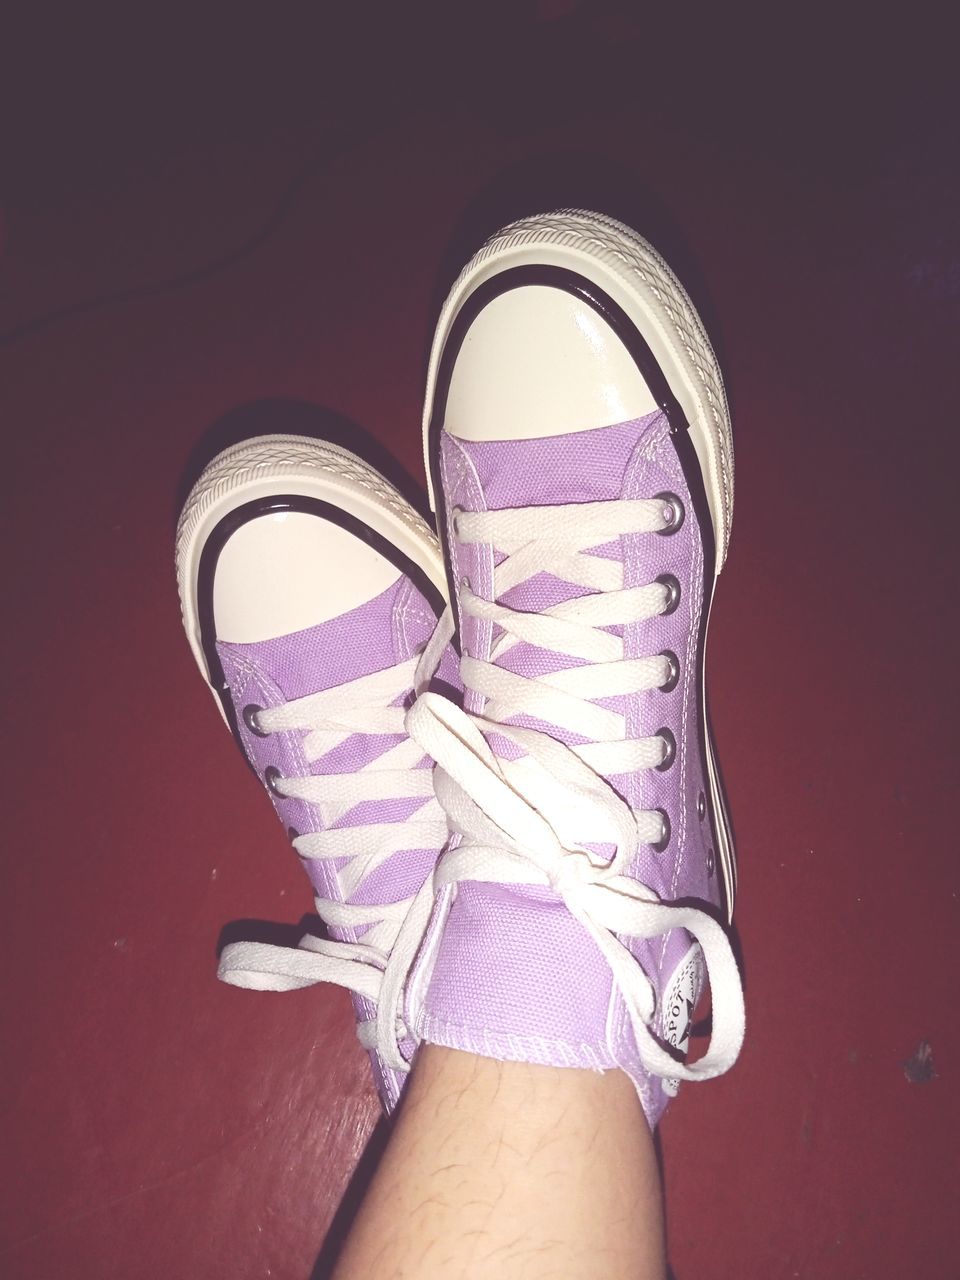 shoe, footwear, human leg, one person, pink, low section, limb, human limb, indoors, purple, adult, studio shot, personal perspective, canvas shoe, human foot, close-up, fashion, women, lifestyles, shoelace, colored background